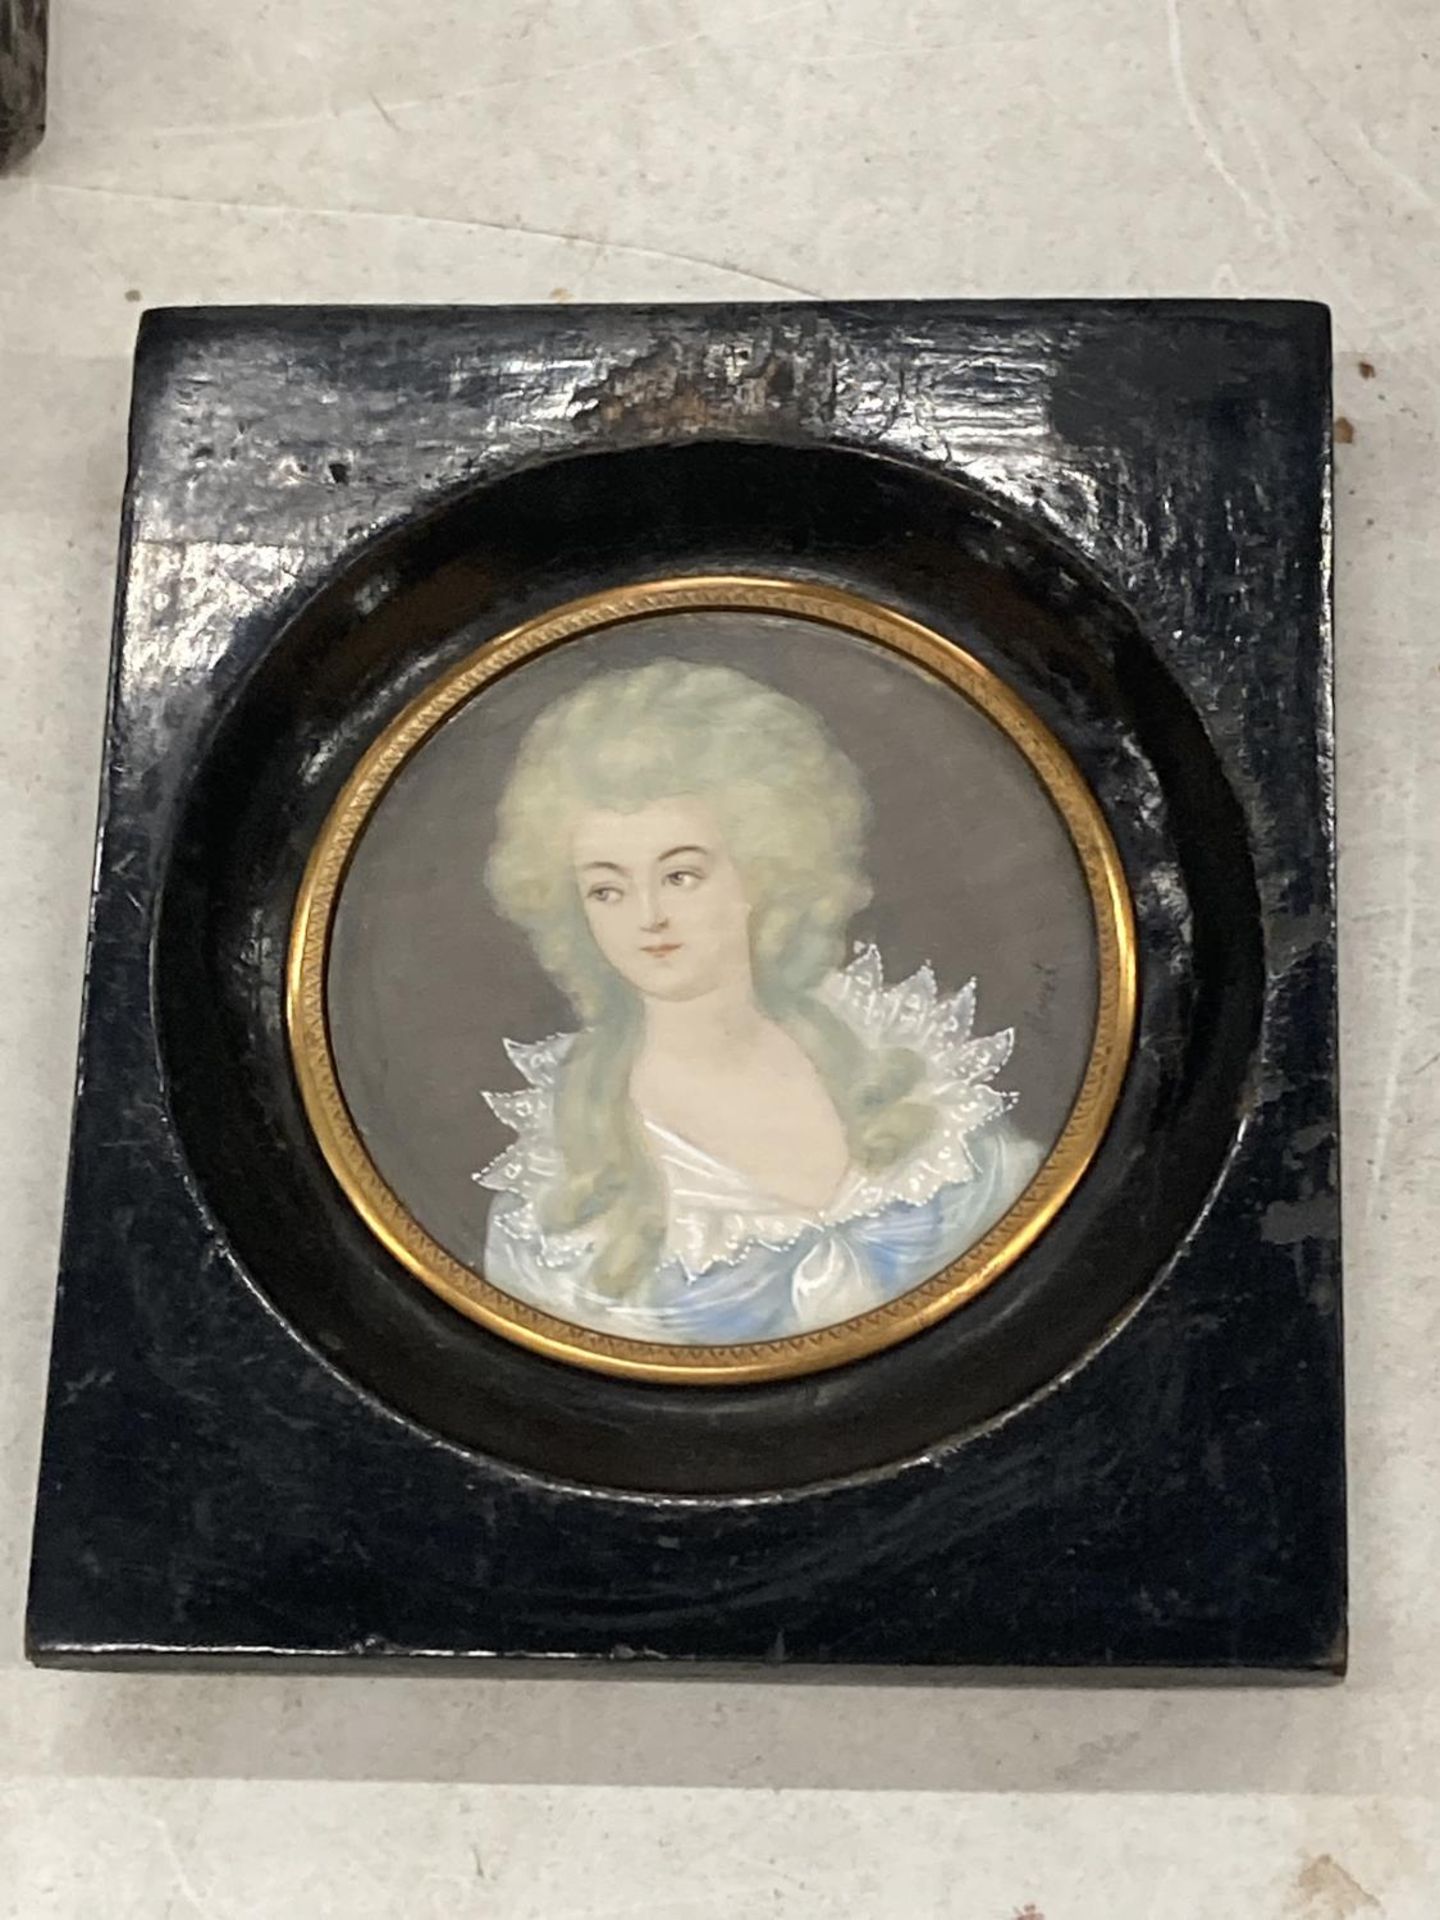 A 19TH CENTURY HAND PAINTED PORTRAIT OF A LADY, SIGNED MONET, IN EBONISED WOODEN FRAME, 10 X 9CM